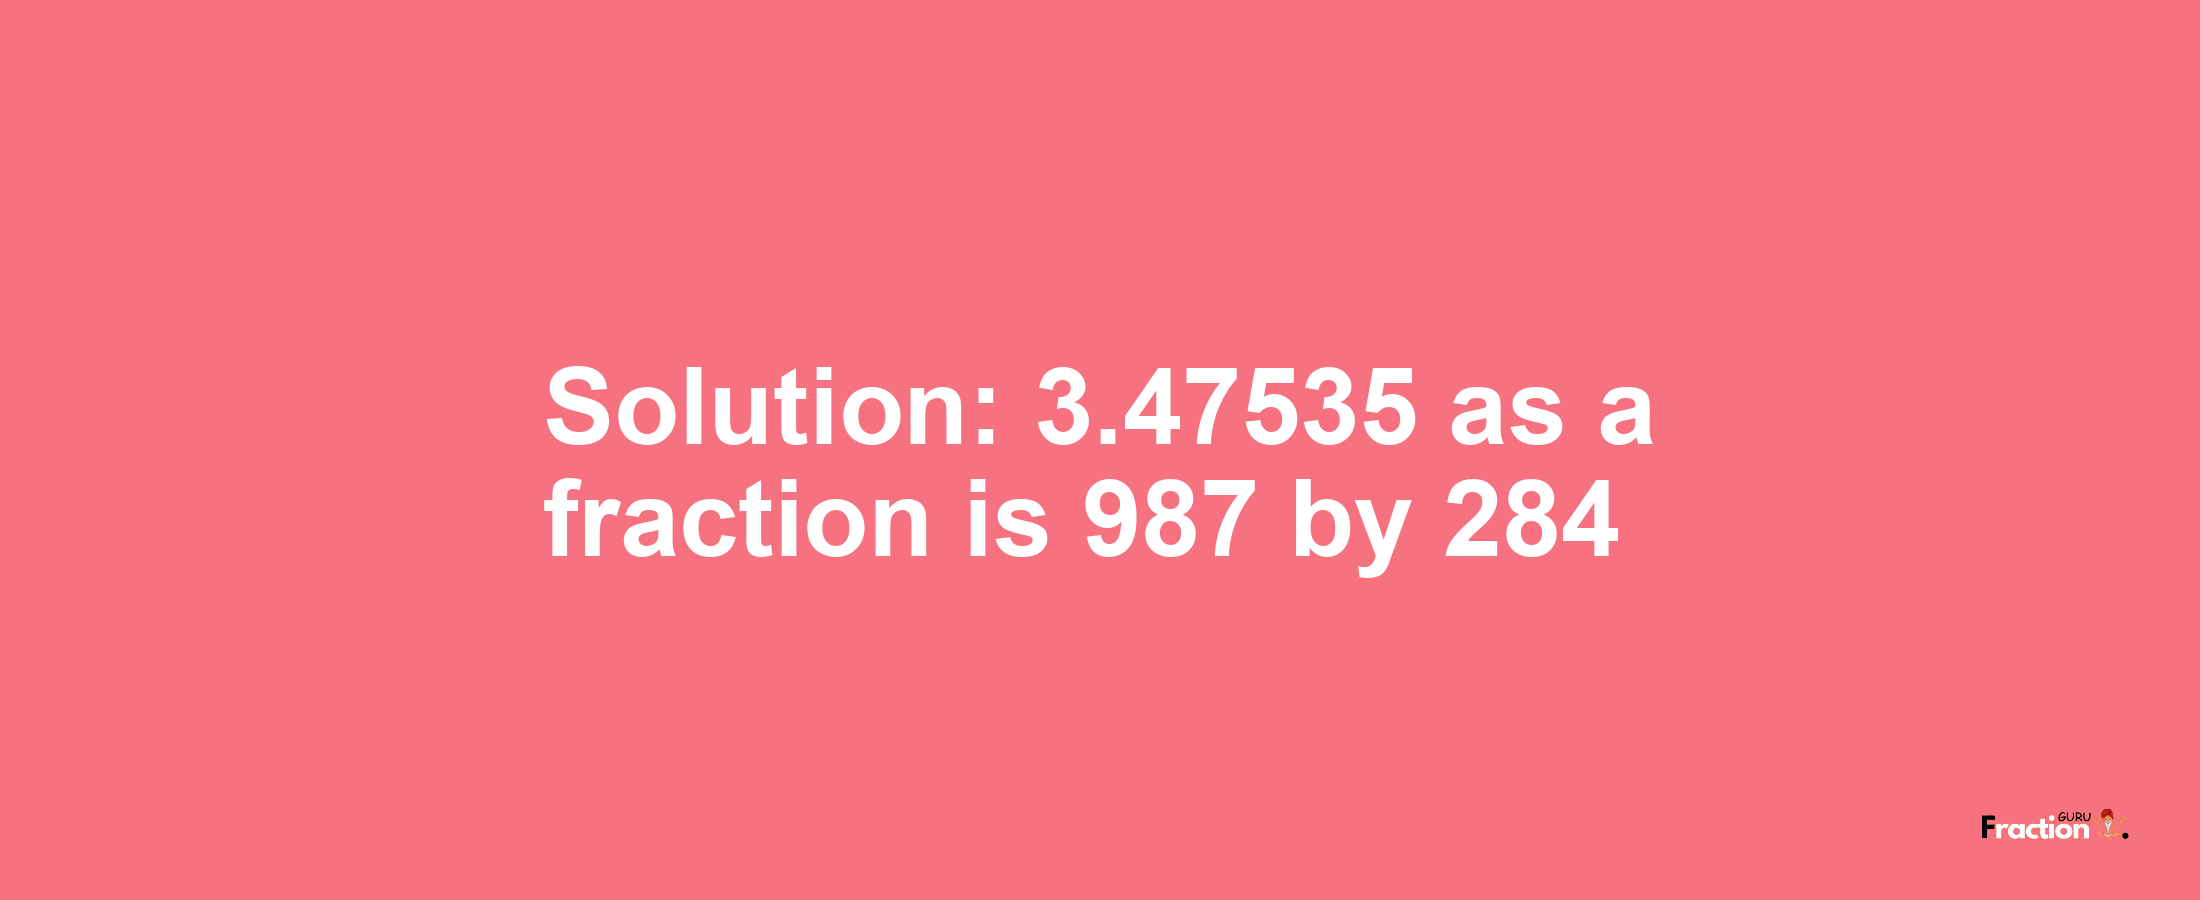 Solution:3.47535 as a fraction is 987/284